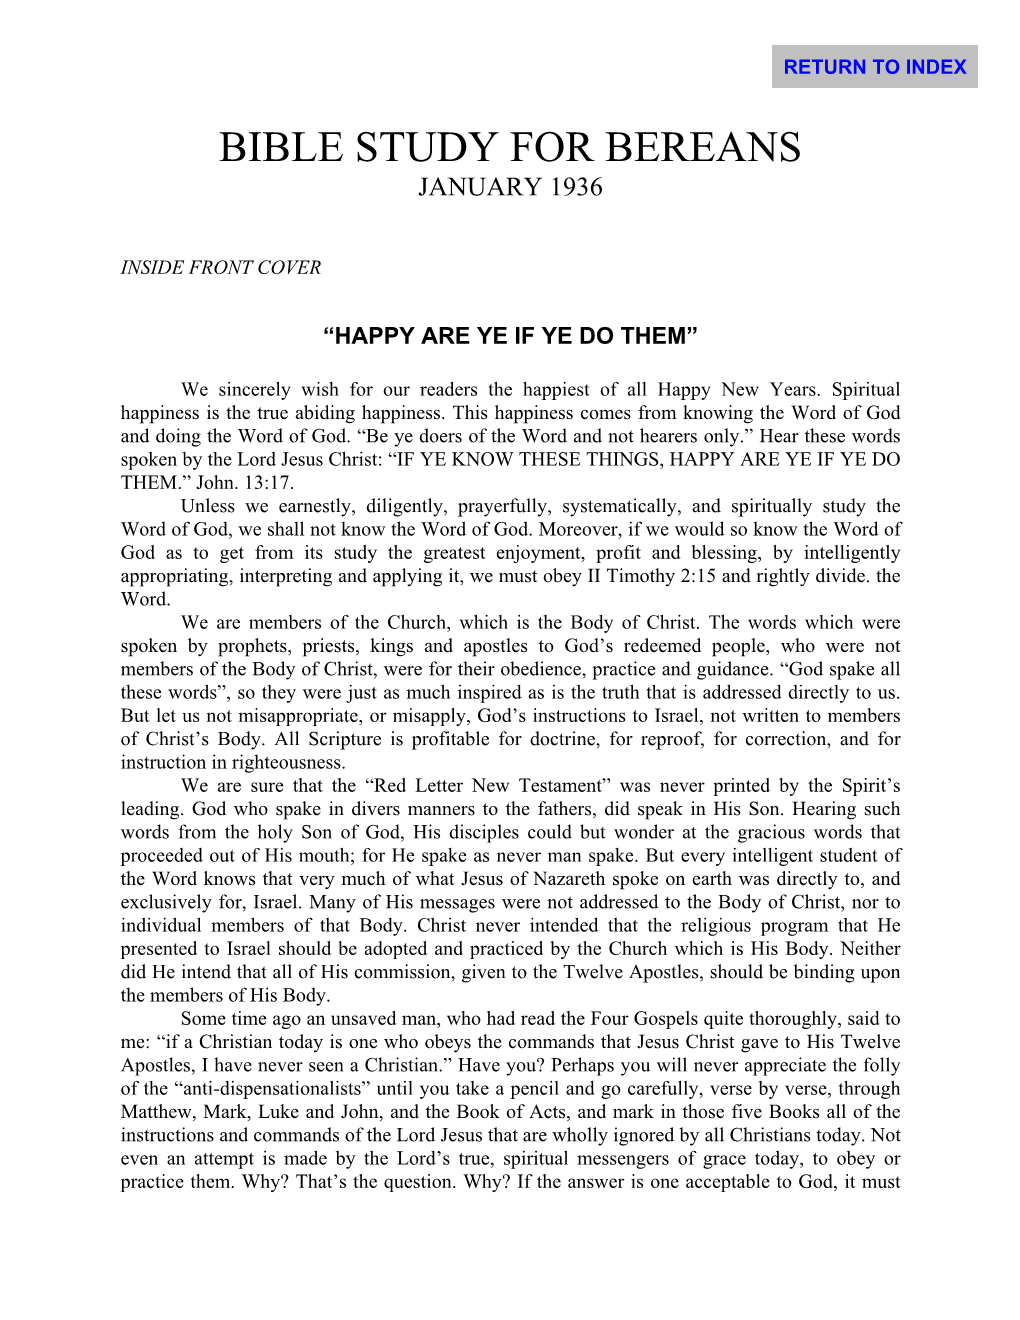 Bible Study for Bereans January 1936